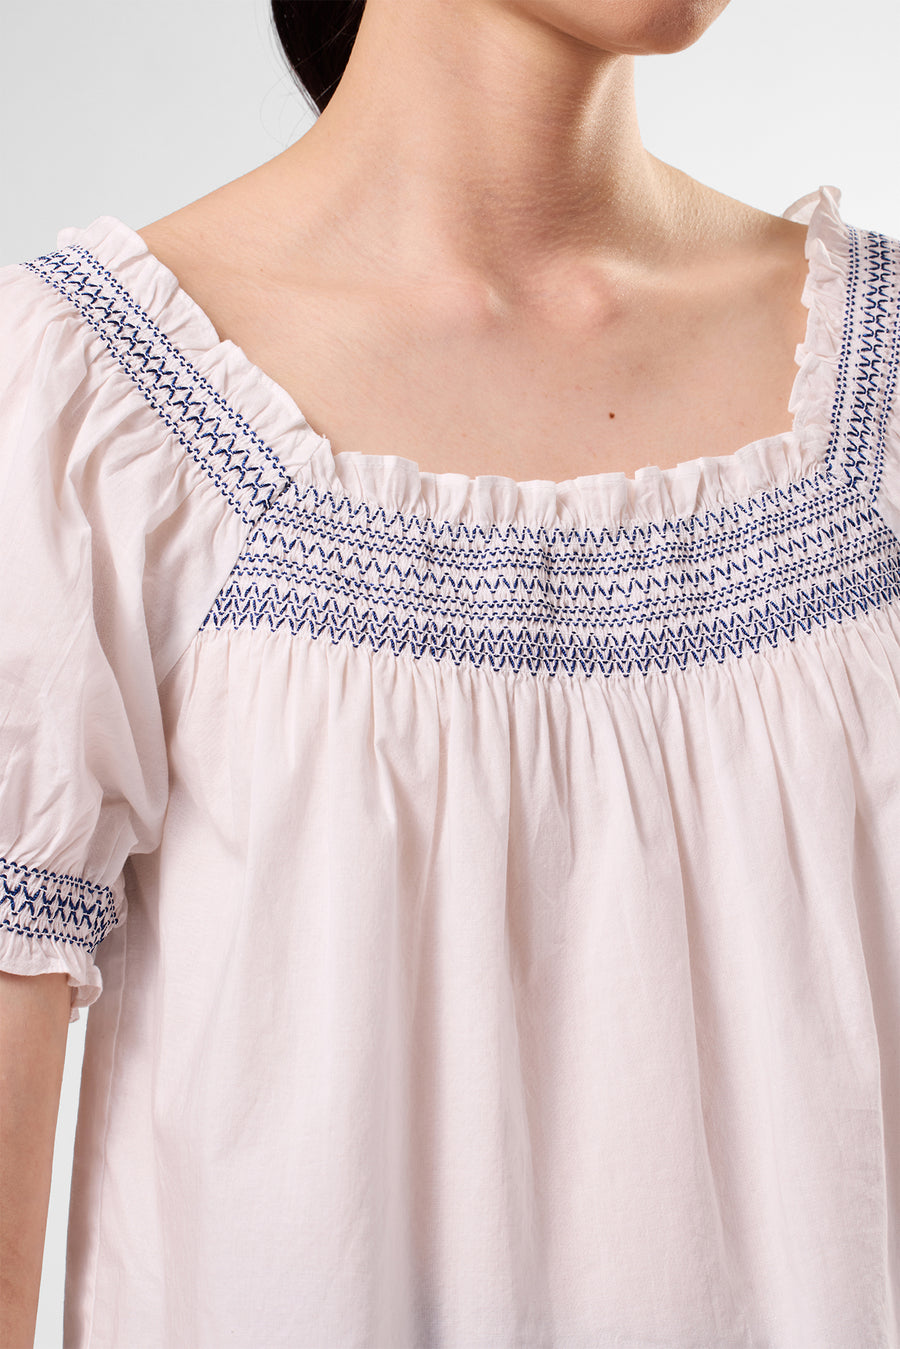 Embroidered Smocked Top - White Cobalt Embroidery